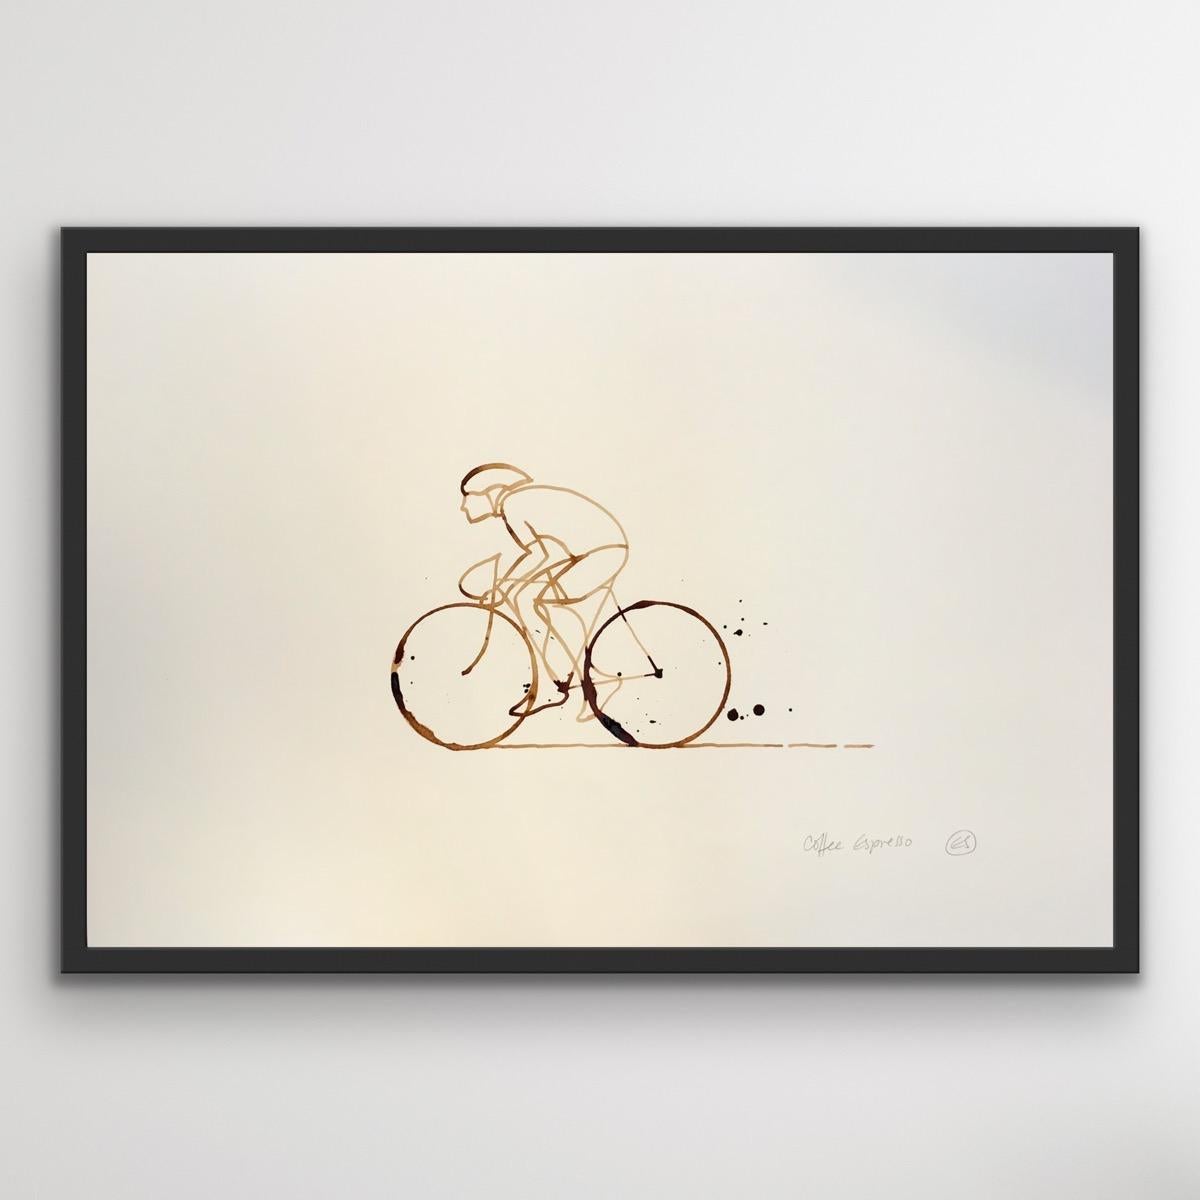 Coffee Espresso #20, Coffee on paper, cycling, people, sport - Print by Eliza Southwood